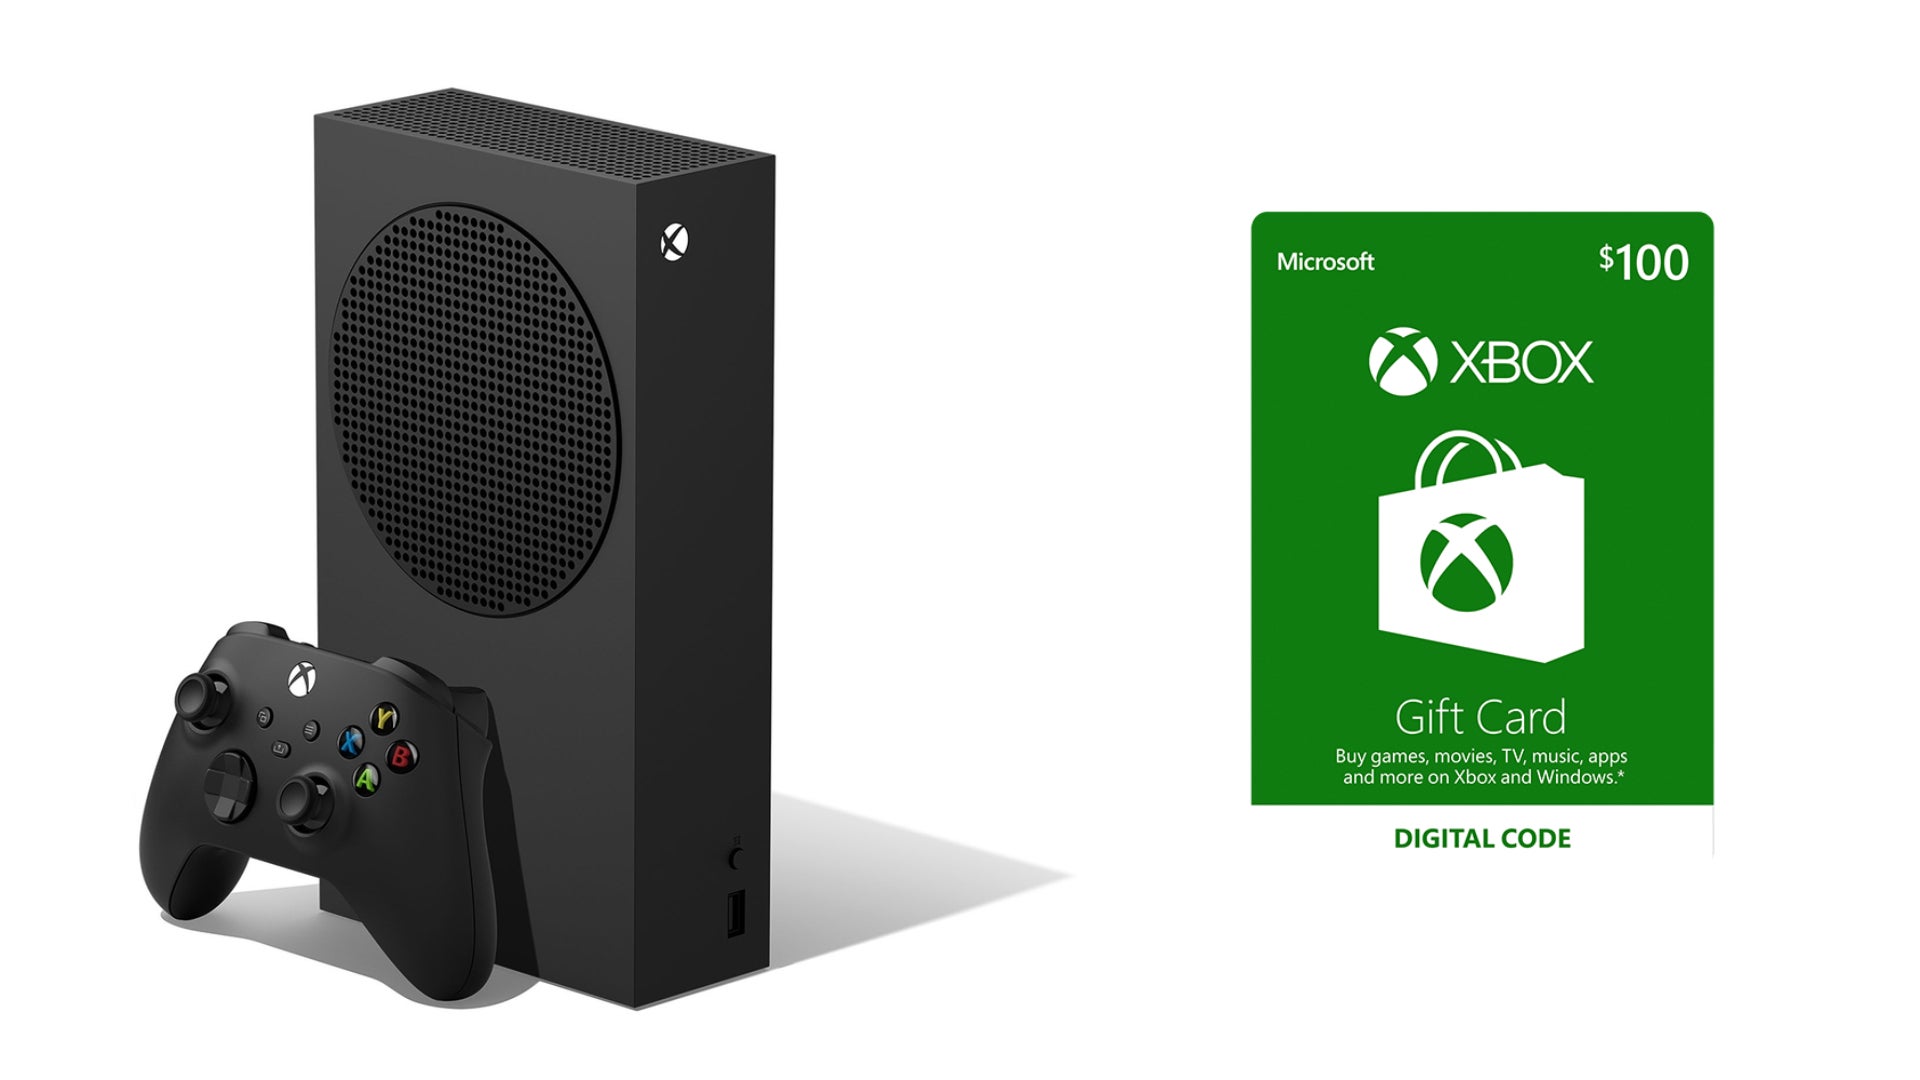 Get $17 off the upcoming 1TB Xbox Series S console when you buy